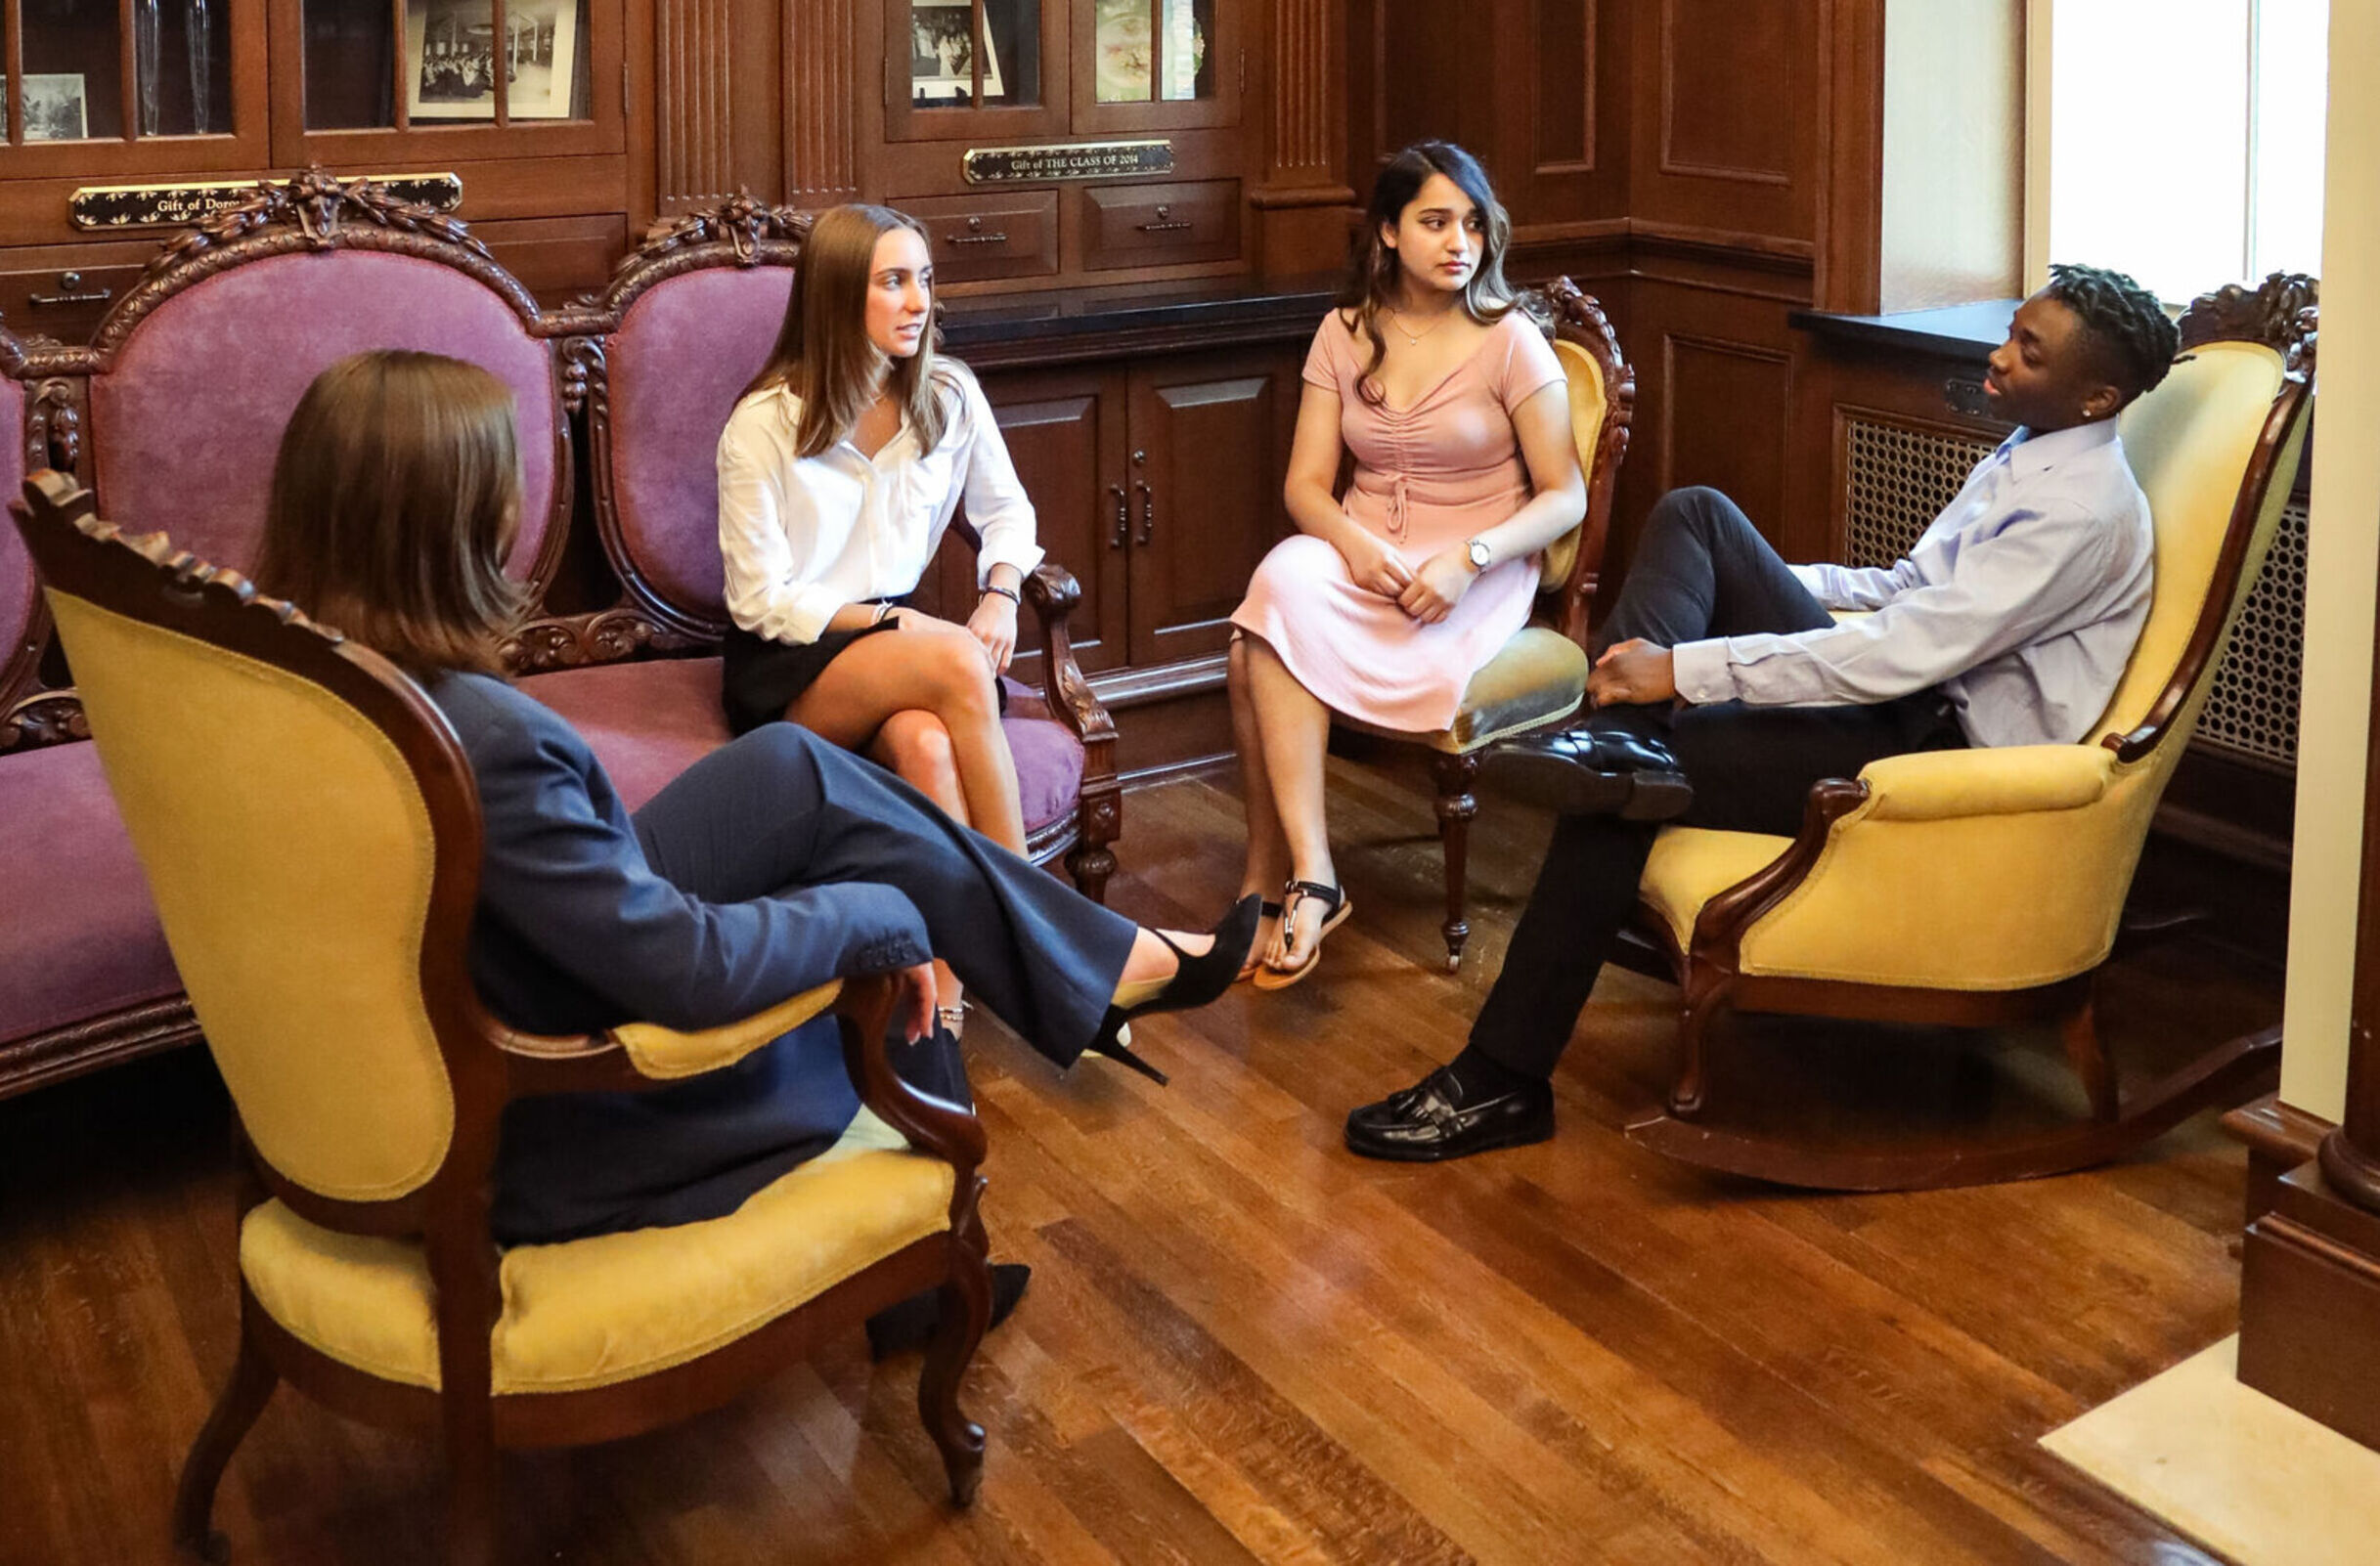 Four business students meet in a comfortable lounge area